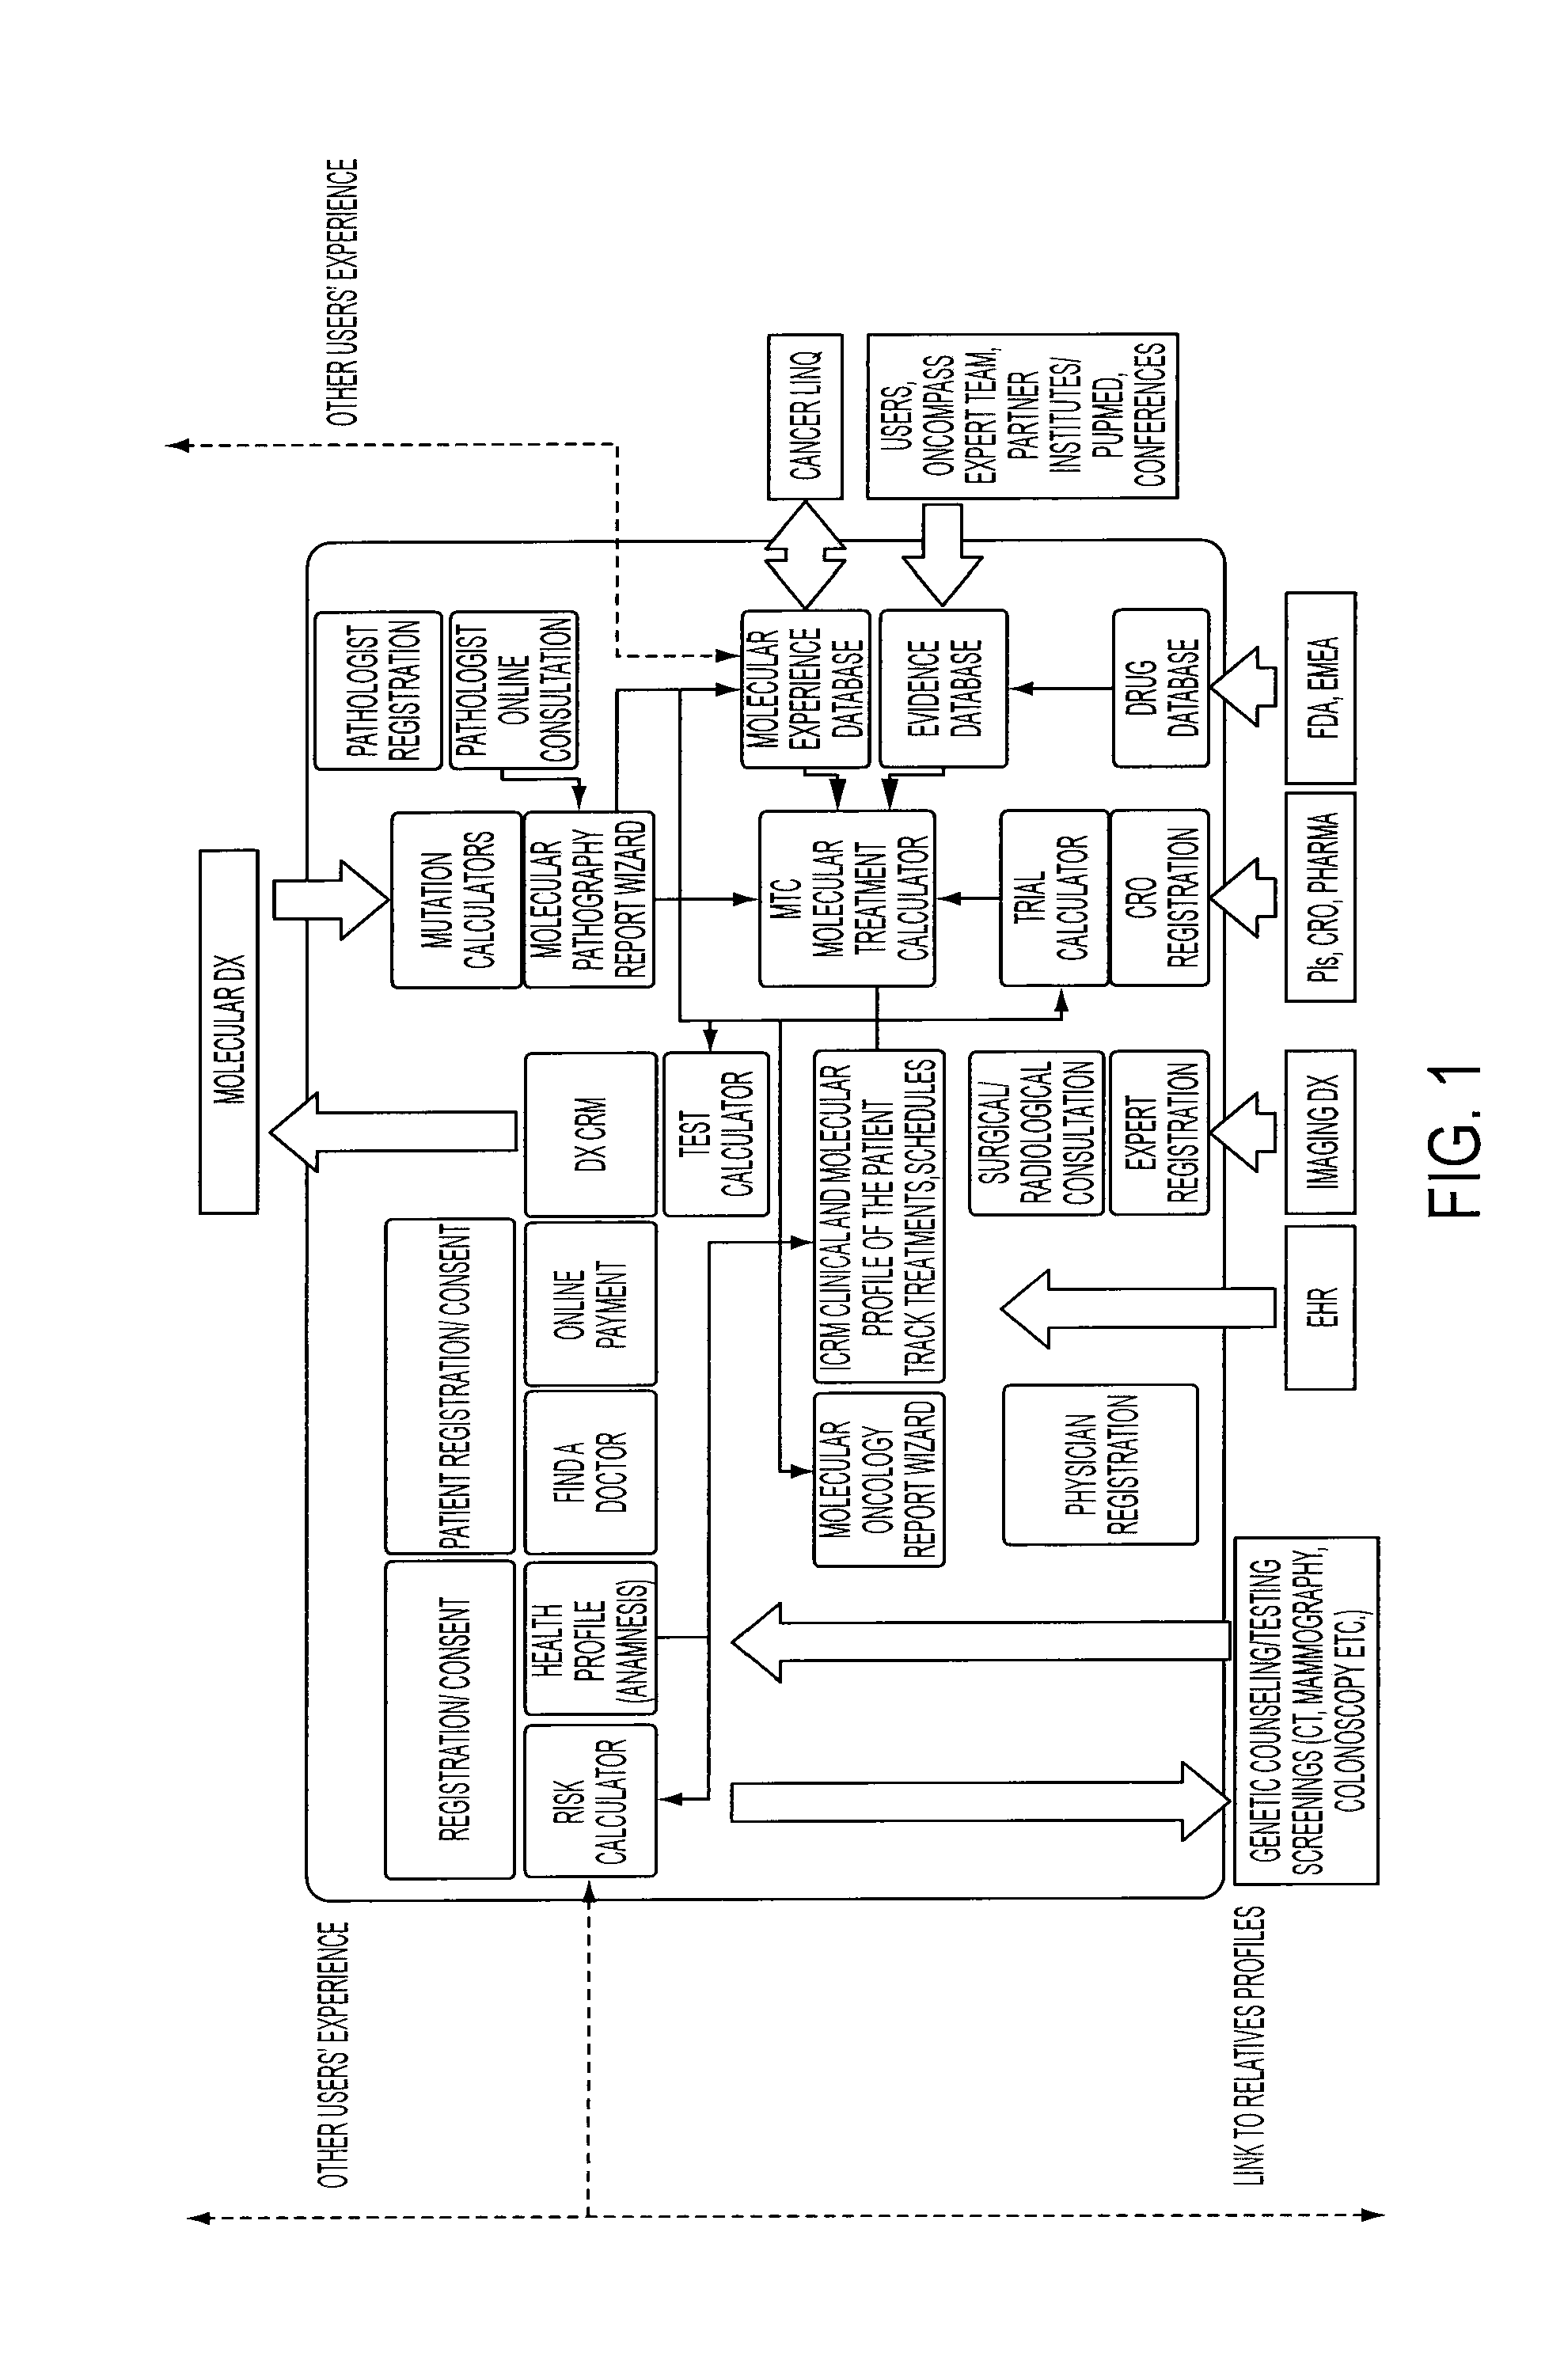 System and method for adaptive medical decision support